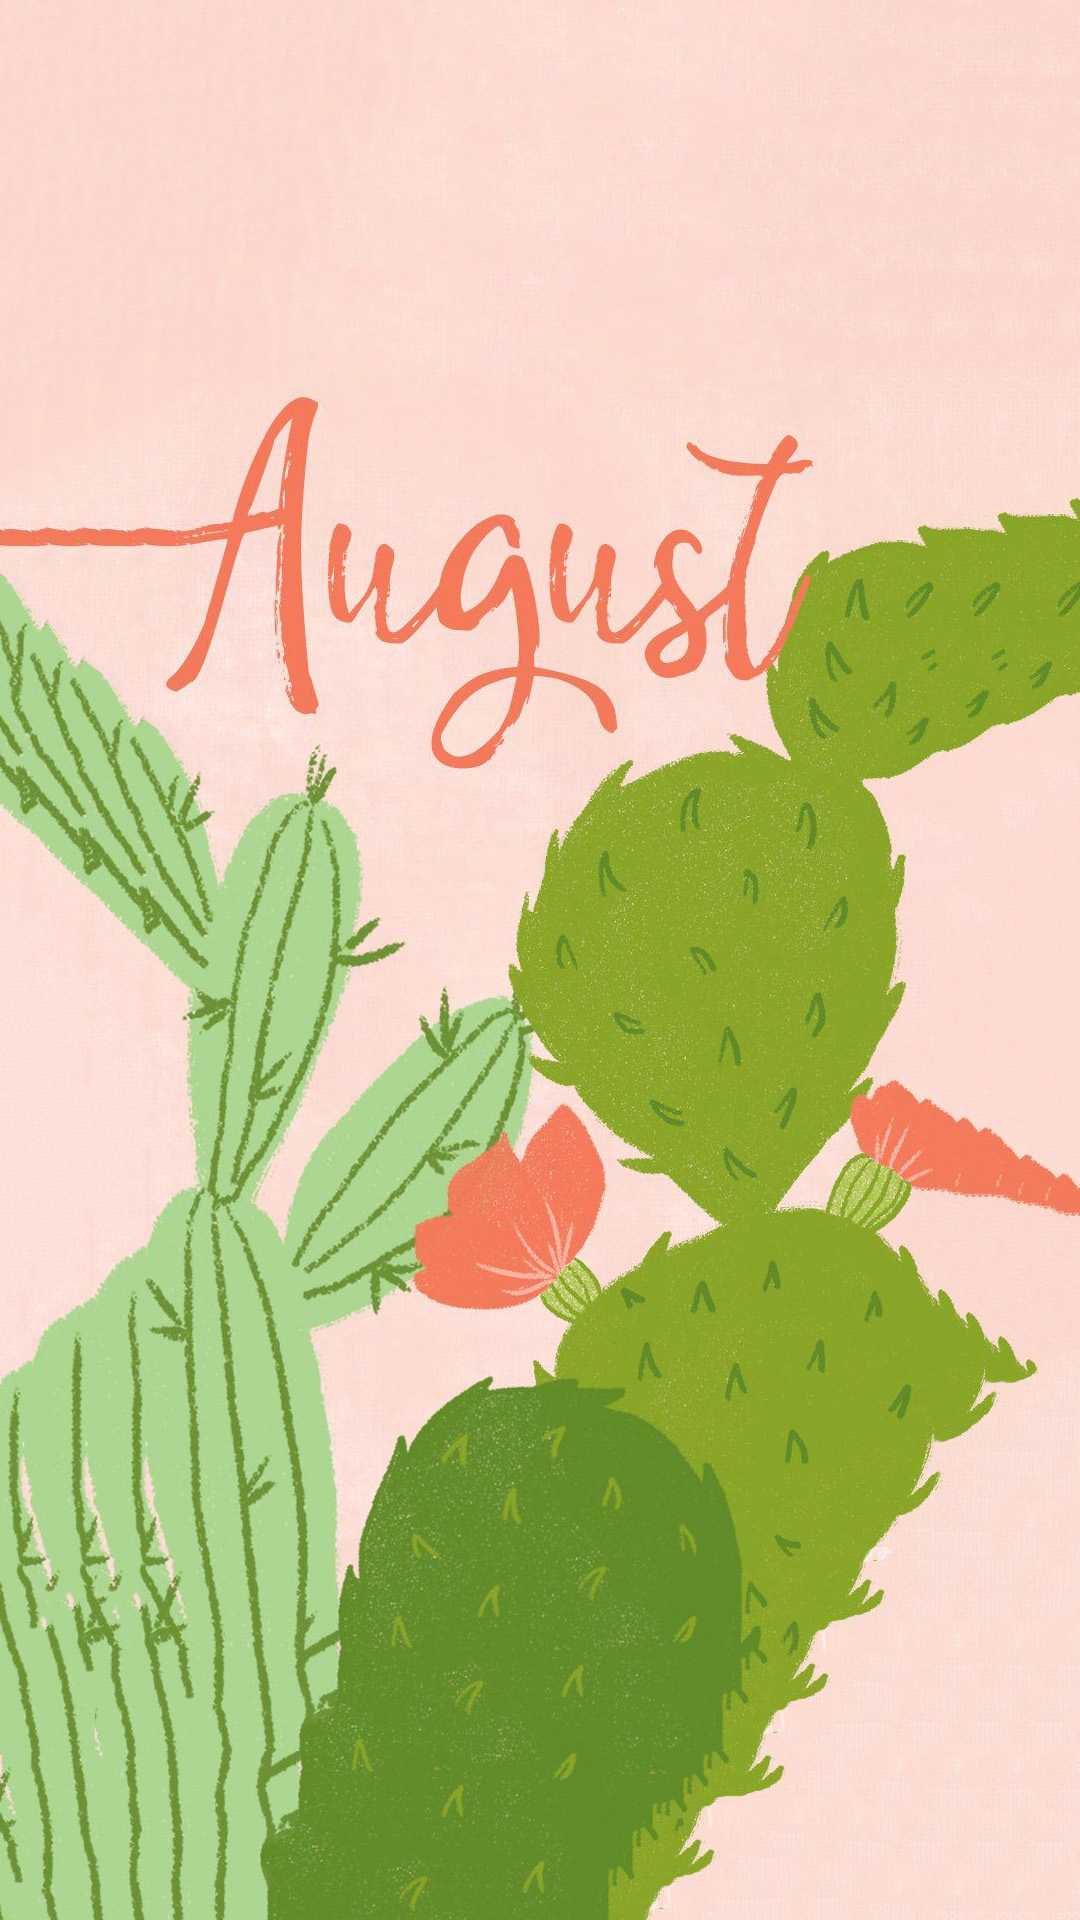 August wallpaper phone background with cactus and pink background - August